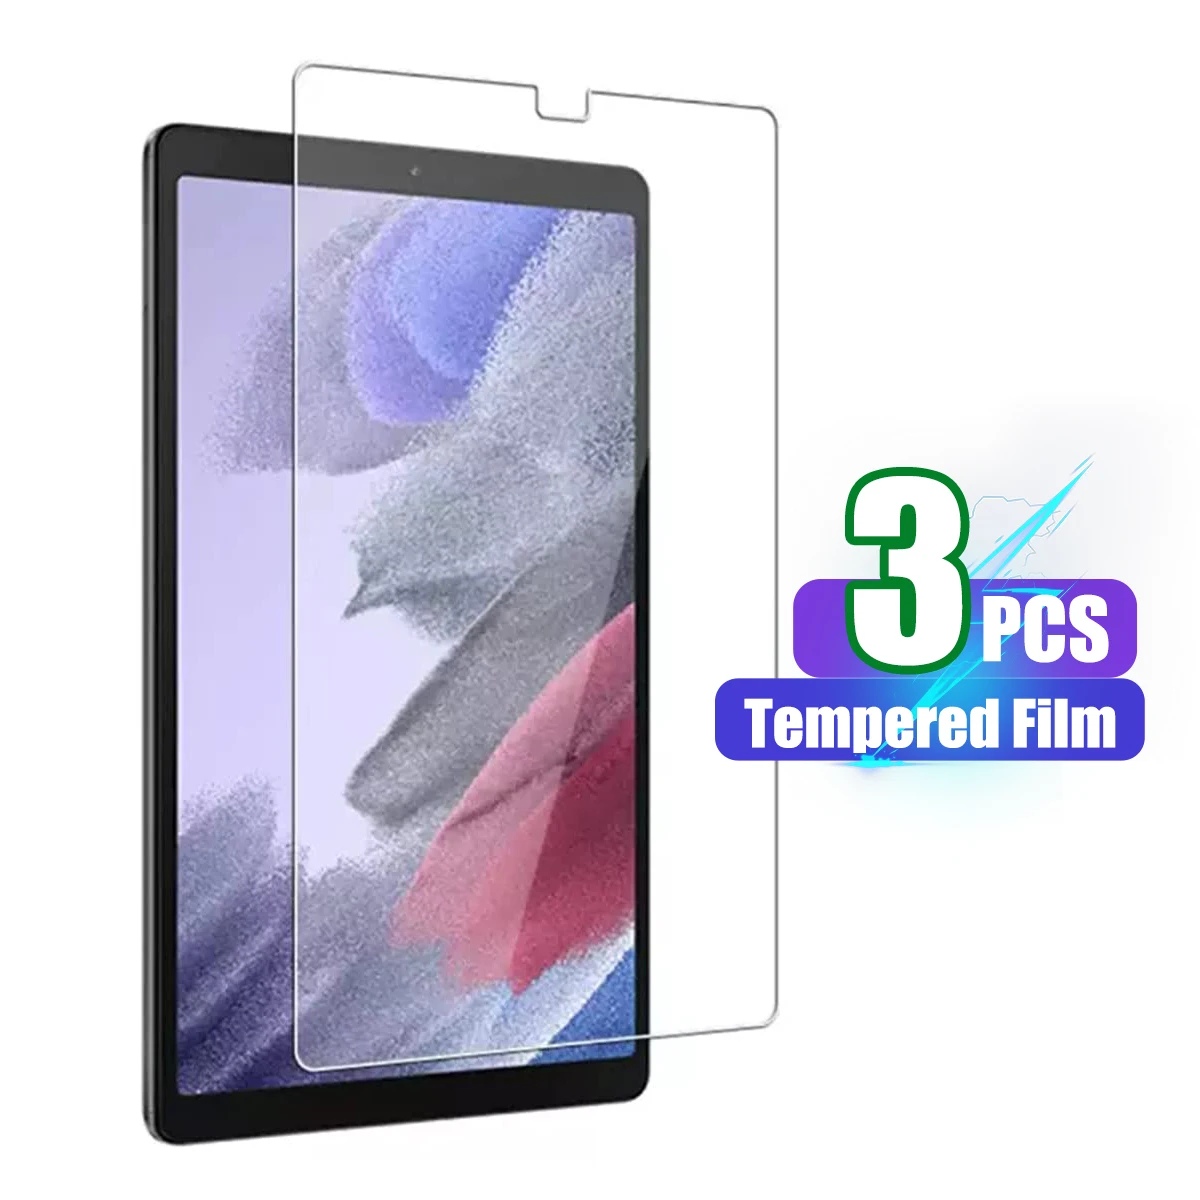 Tempered Glass For Samsung Galaxy Tab A7 Lite SM-T220 SM-T225 8.7 inch Screen Protective Film Anti-Scratch HD 9H Hardness 2021